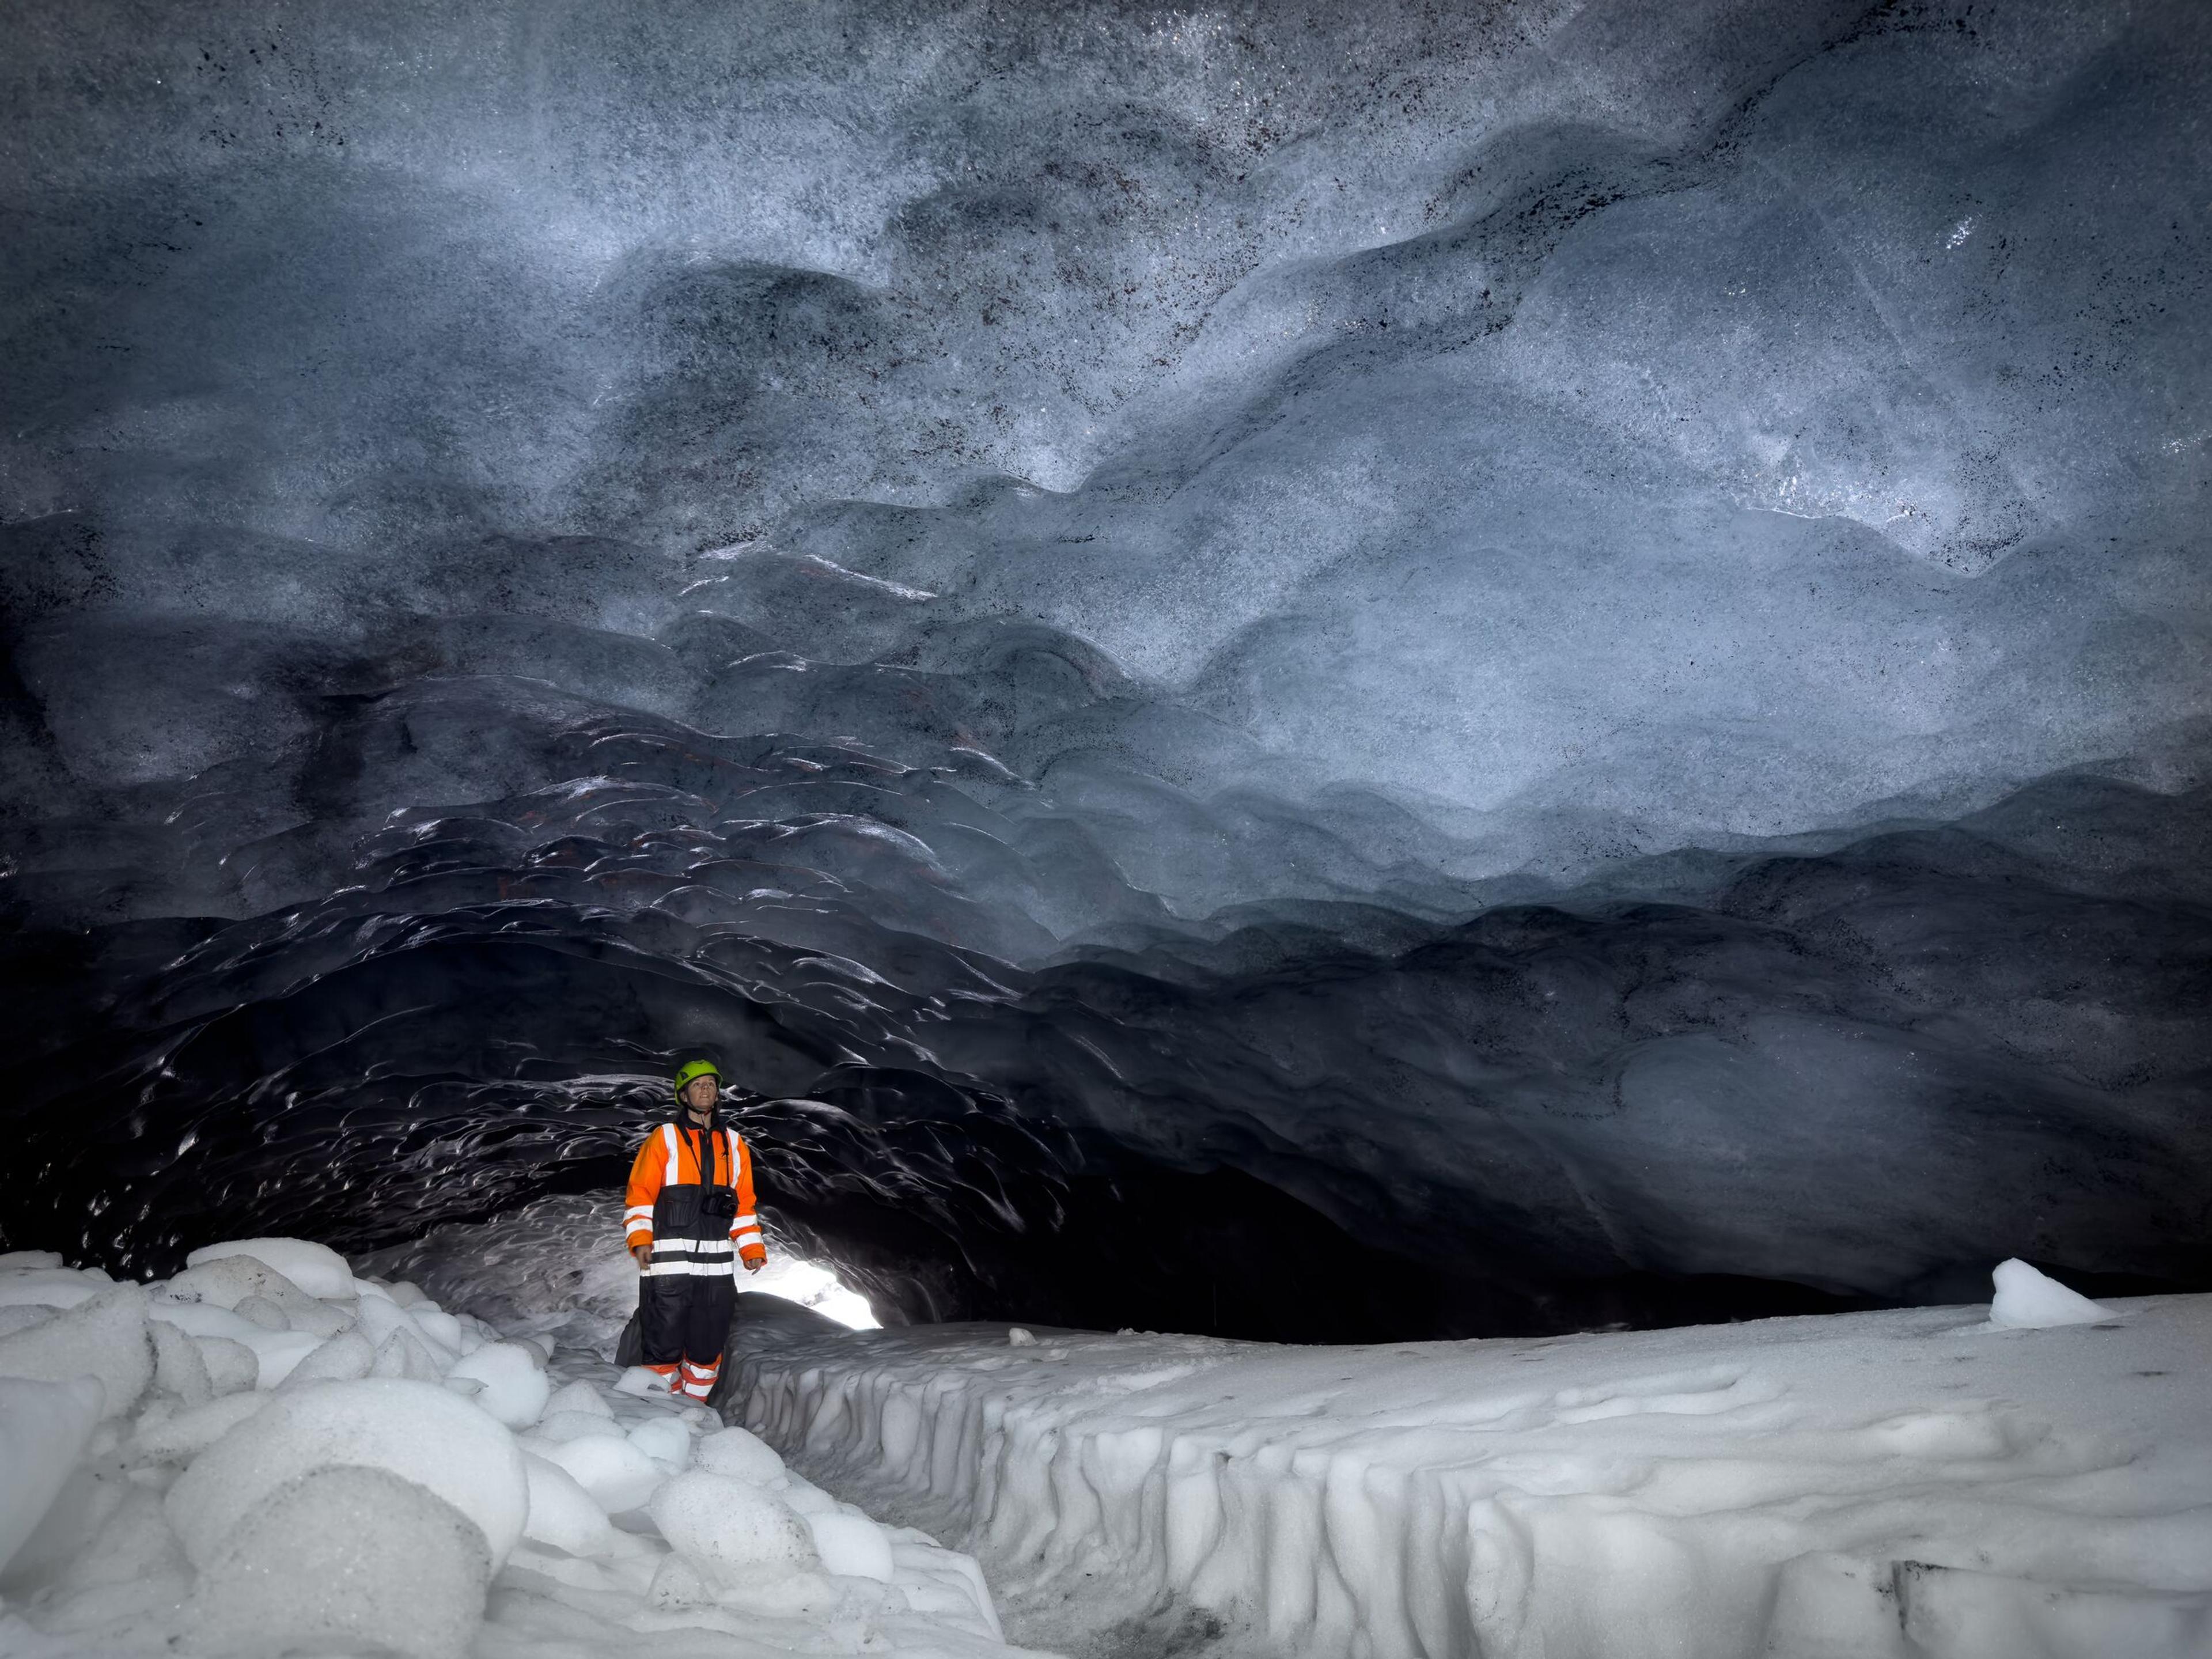 An explorer in safety gear examining the ice ceiling of Askur ice cave, surrounded by snow and ice.